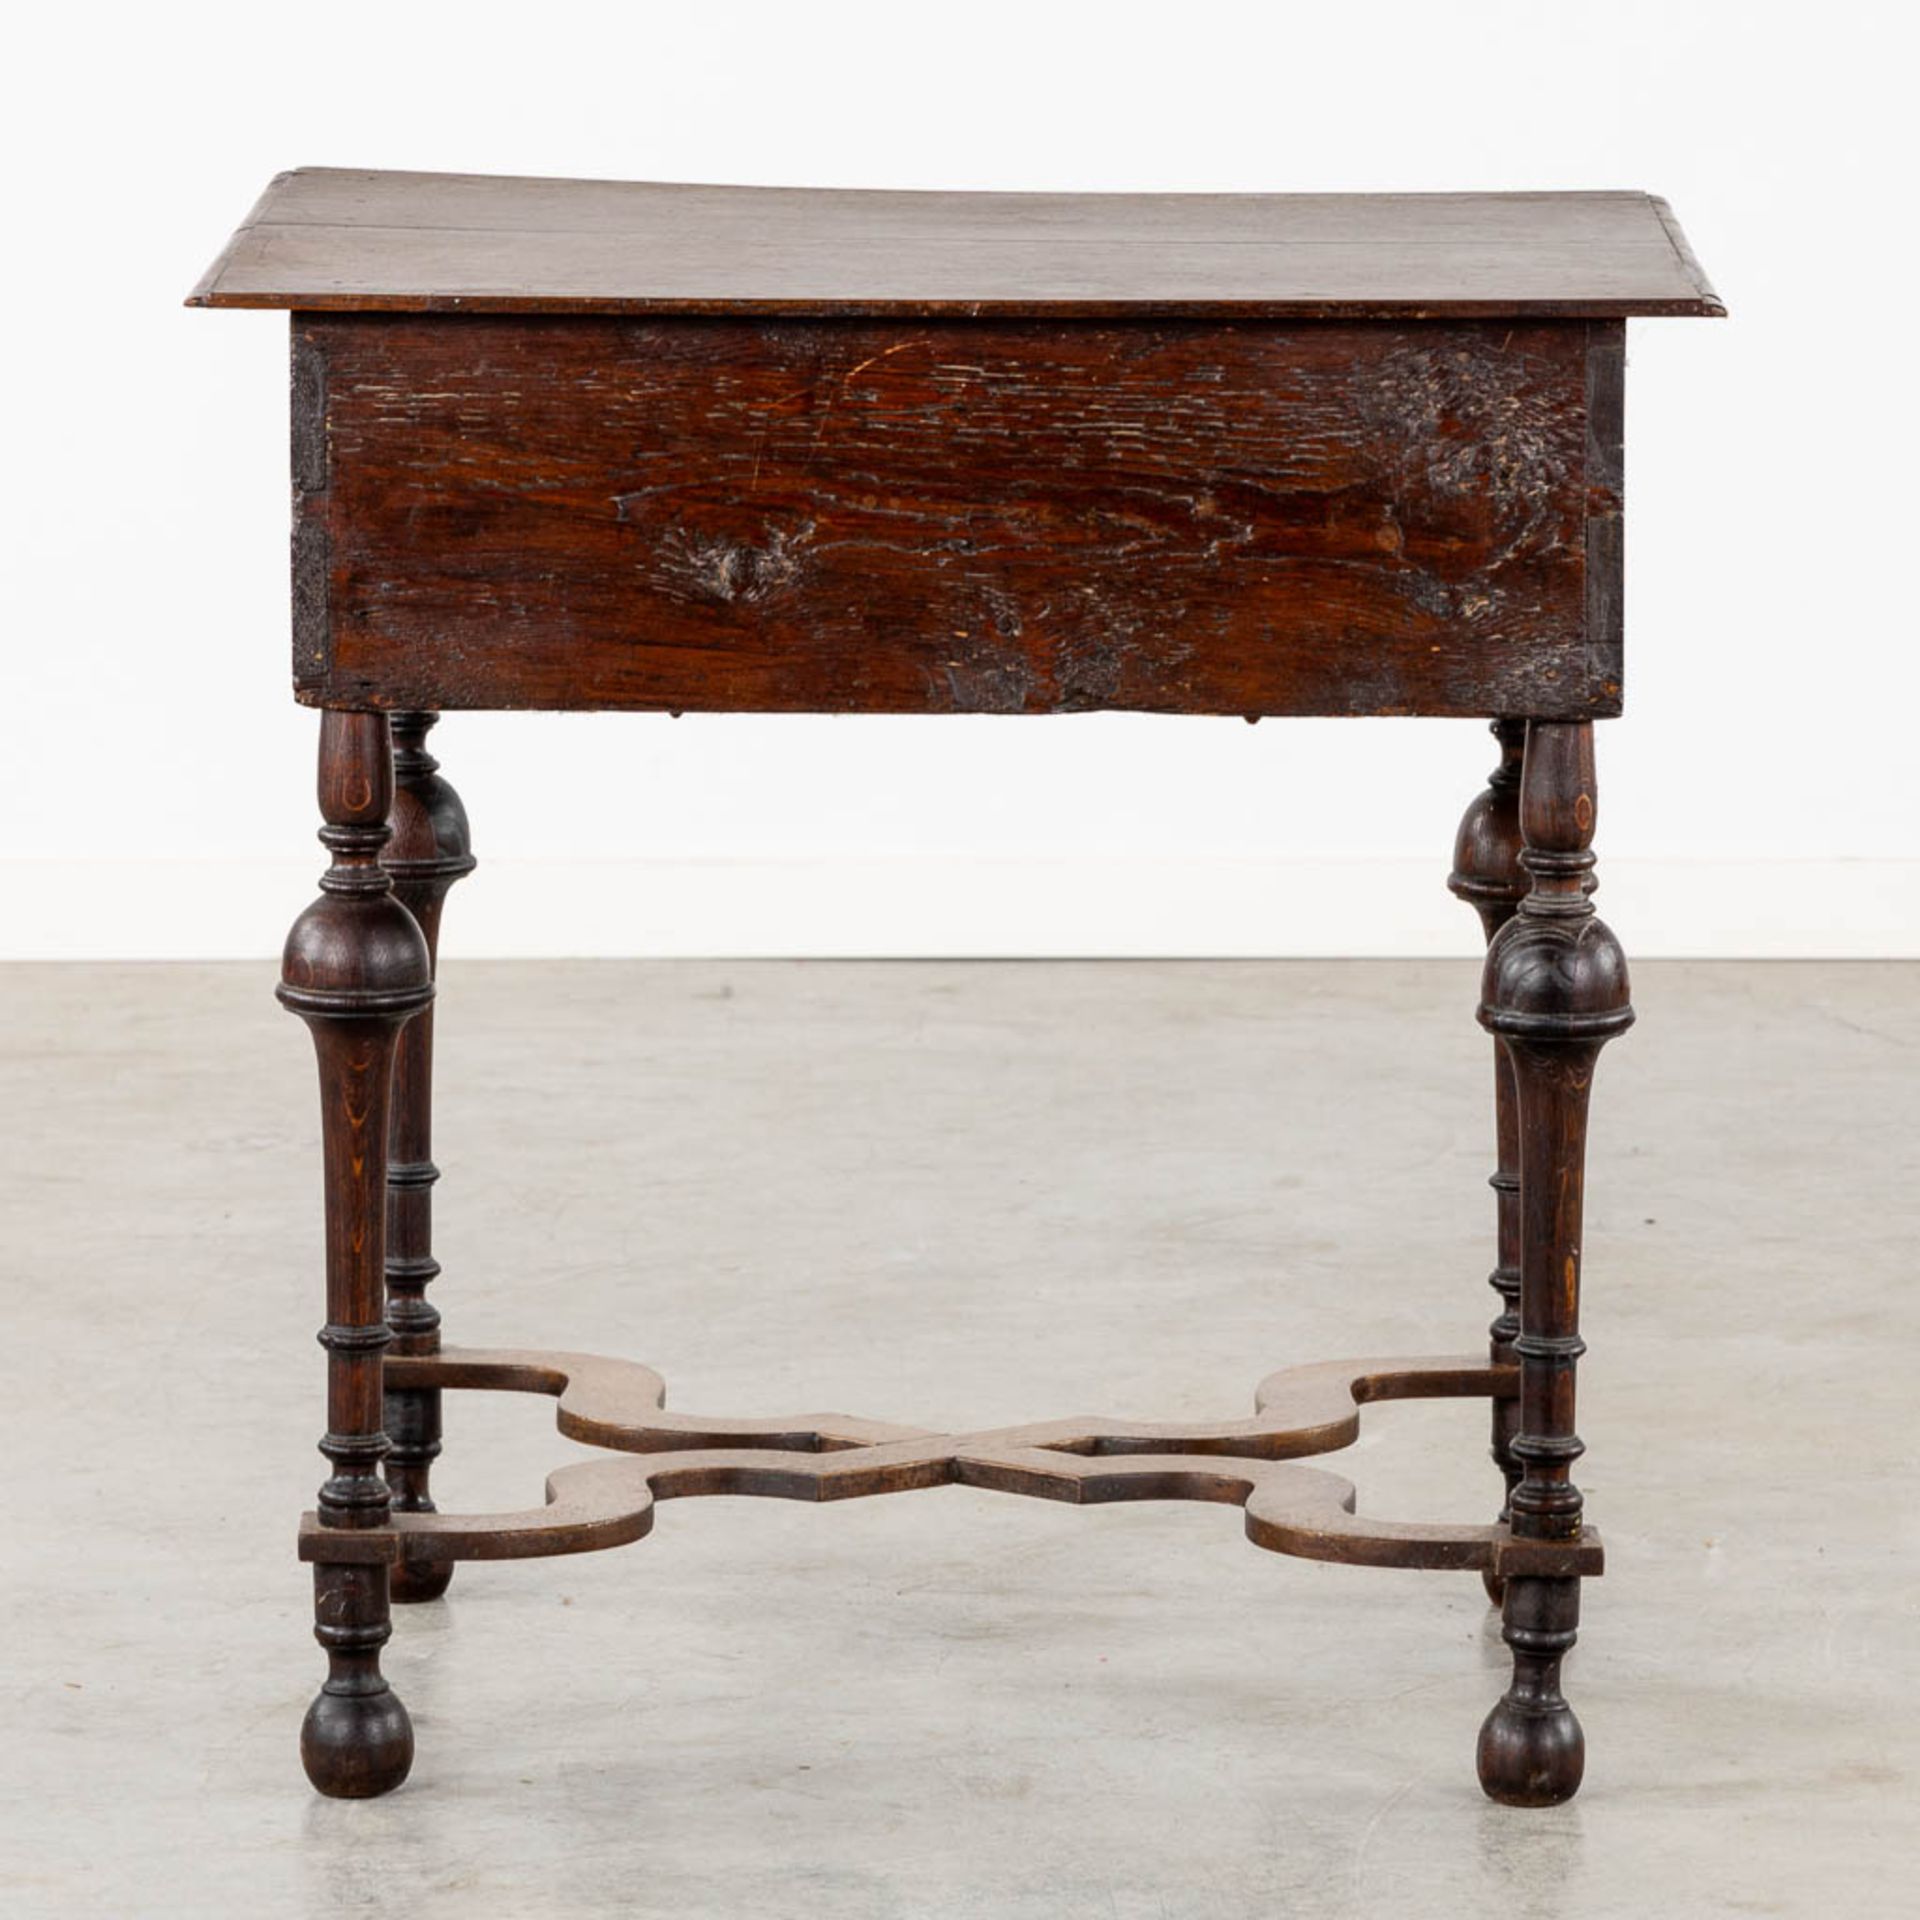 An antique oak 'Pay Table', The Netherlands, 18th C. (L:53 x W:69 x H:70 cm) - Image 6 of 11